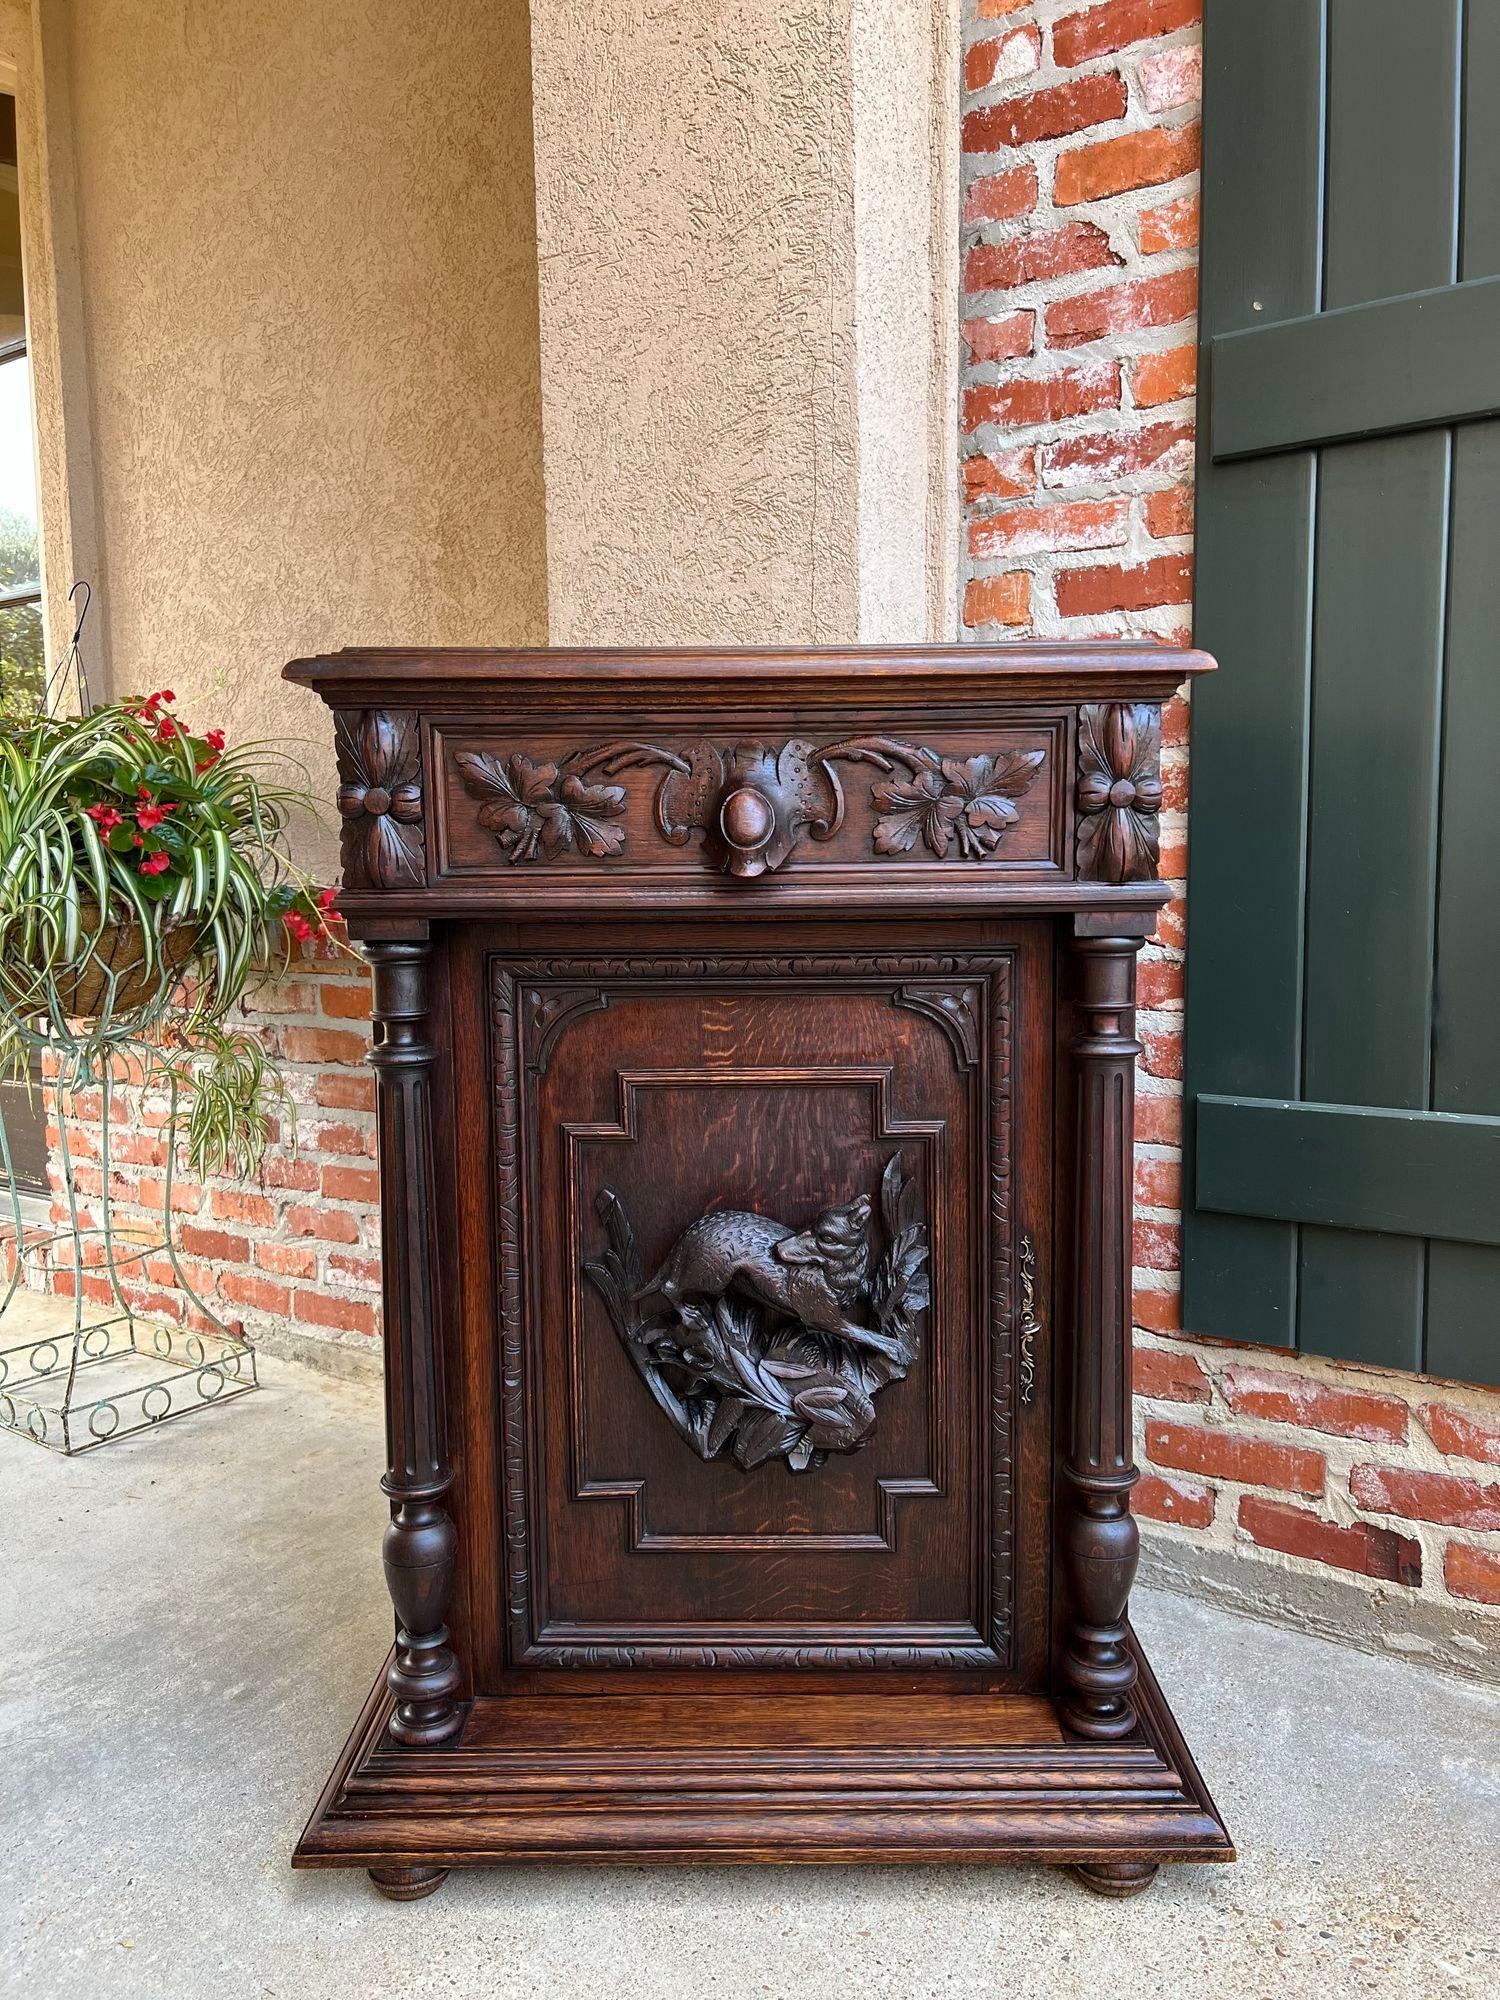 19th century French hunt cabinet carved oak black forest lodge foyer sideboard.

Directly imported from France, a beautifully hand carved 19th century French “jam” or confiturier cabinet, in a versatile size, perfect for placement in any room and